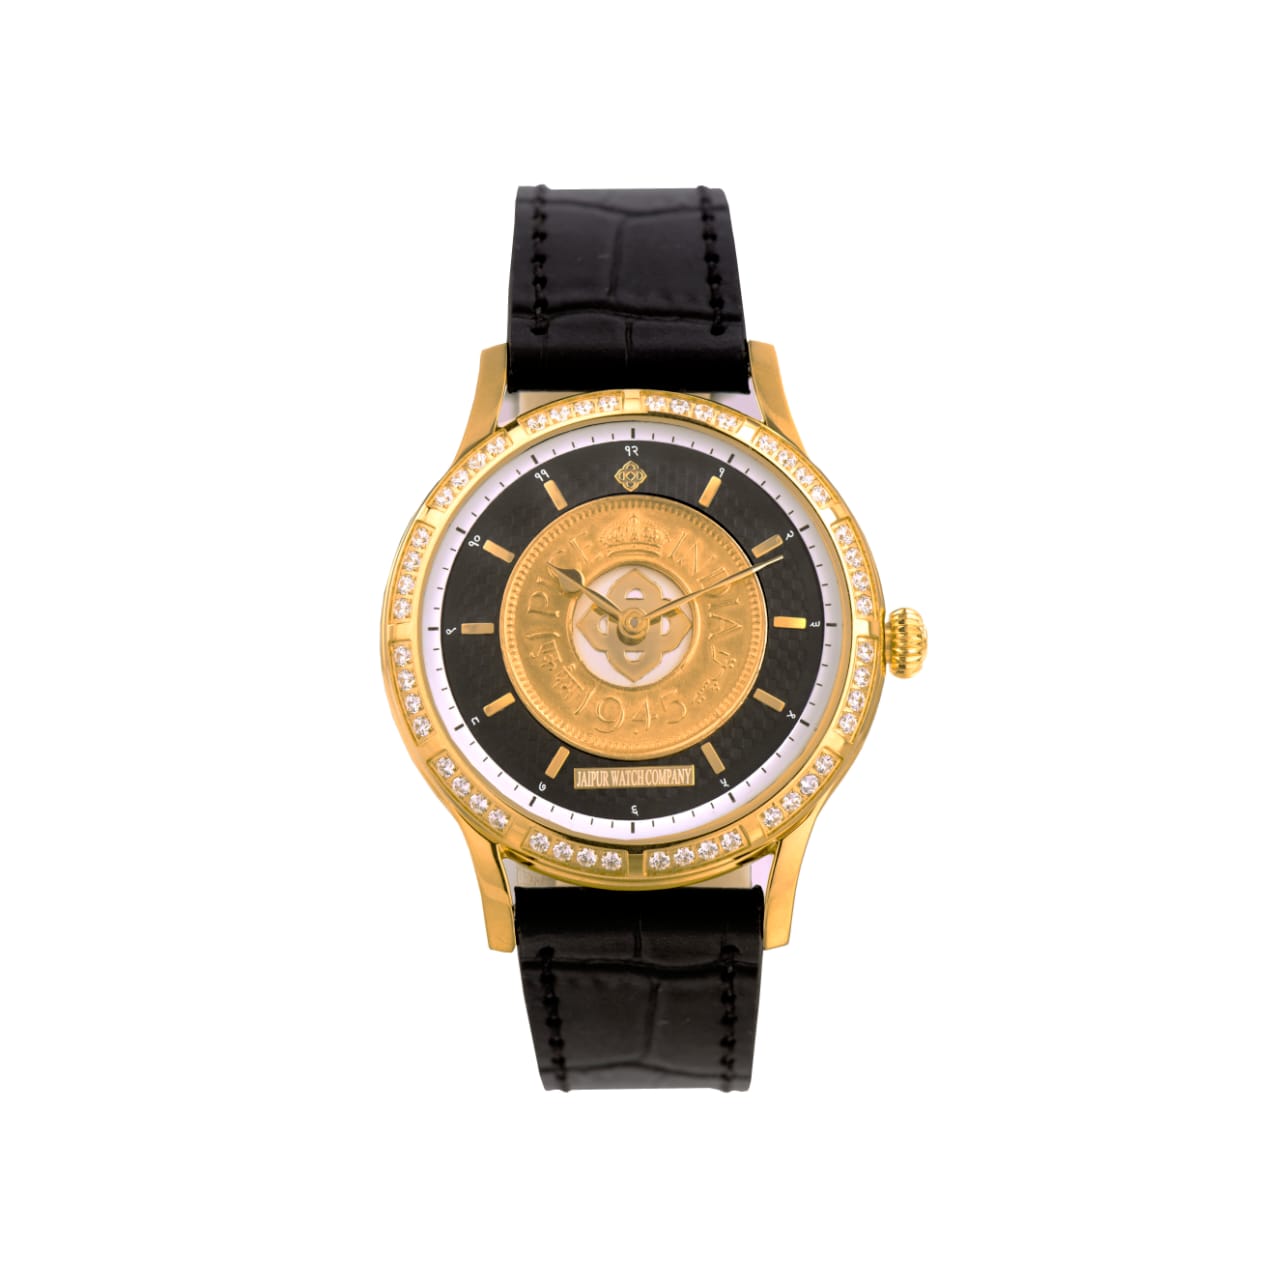 One Pice Coin Watch (Women)